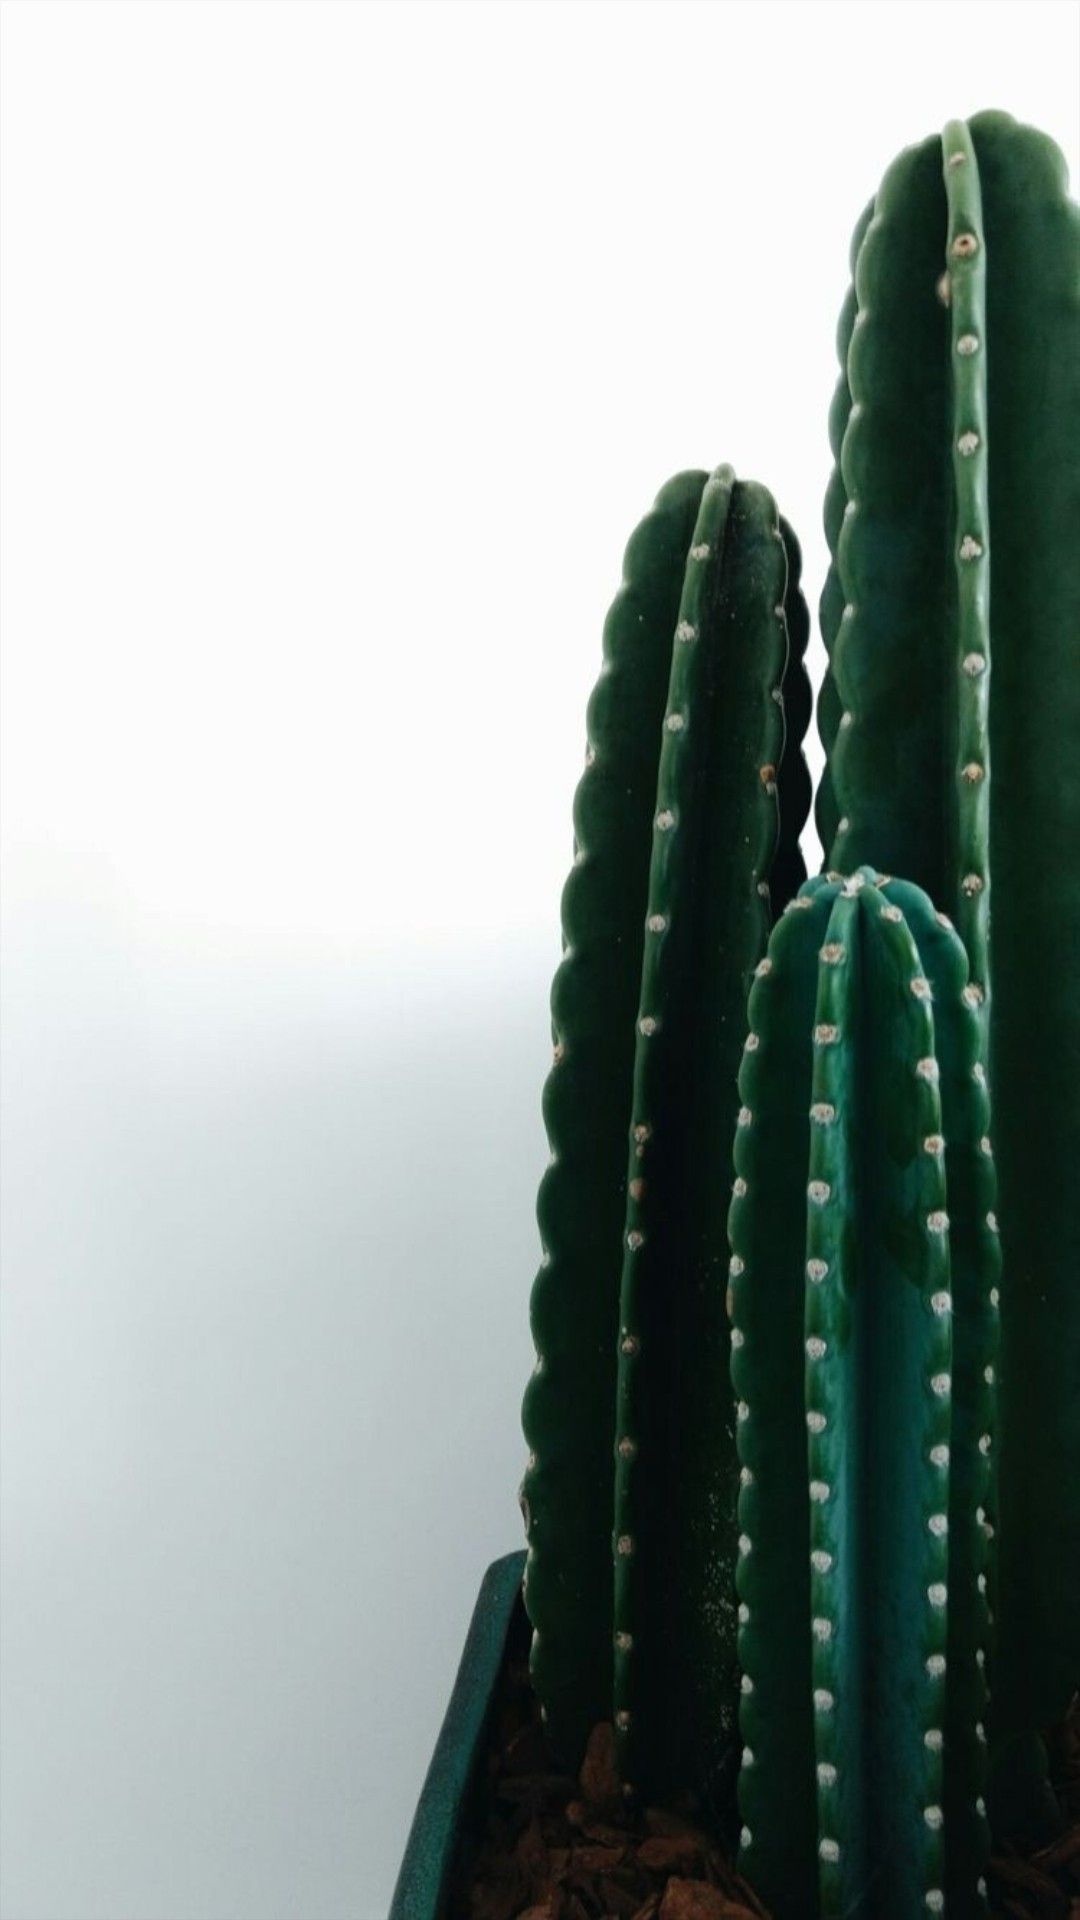 Cactus: The San Pedro species contains mescaline, which is used in shamanic rituals. 1080x1920 Full HD Background.